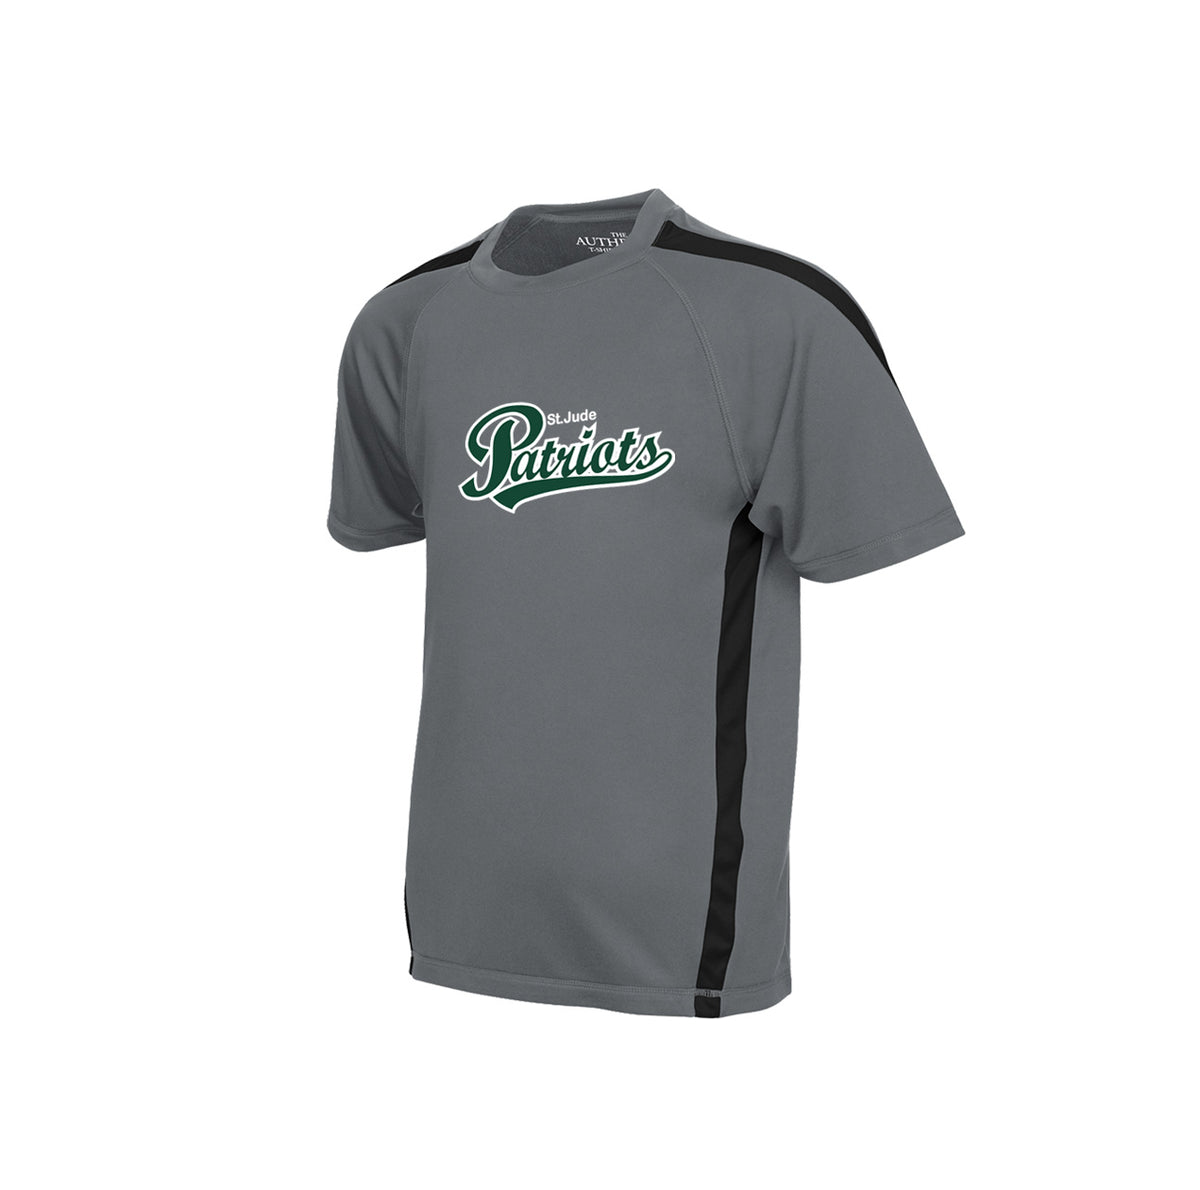 ST. JUDE SCHOOL GYM T-SHIRT, WICKING, YOUTH